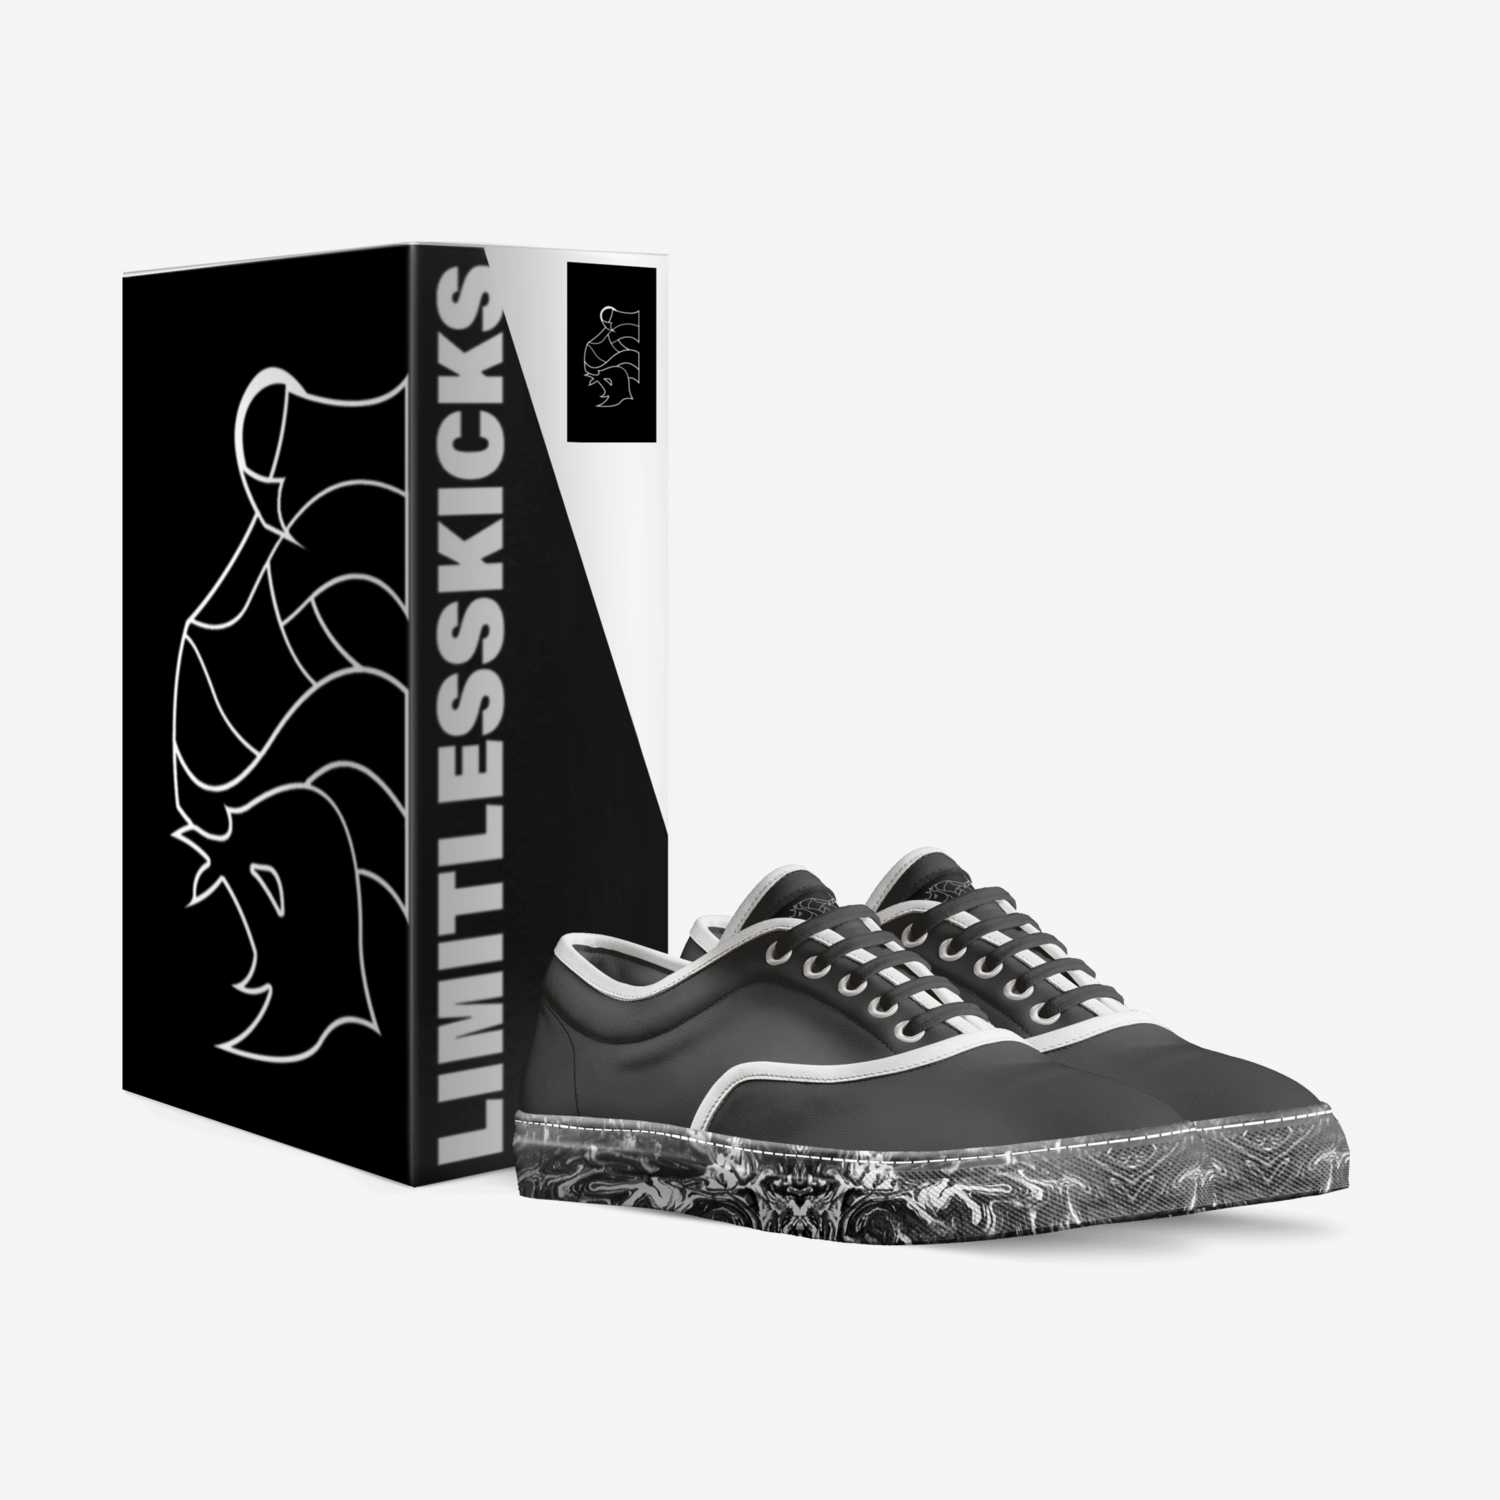 White Rhino custom made in Italy shoes by Limitless Kicks | Box view